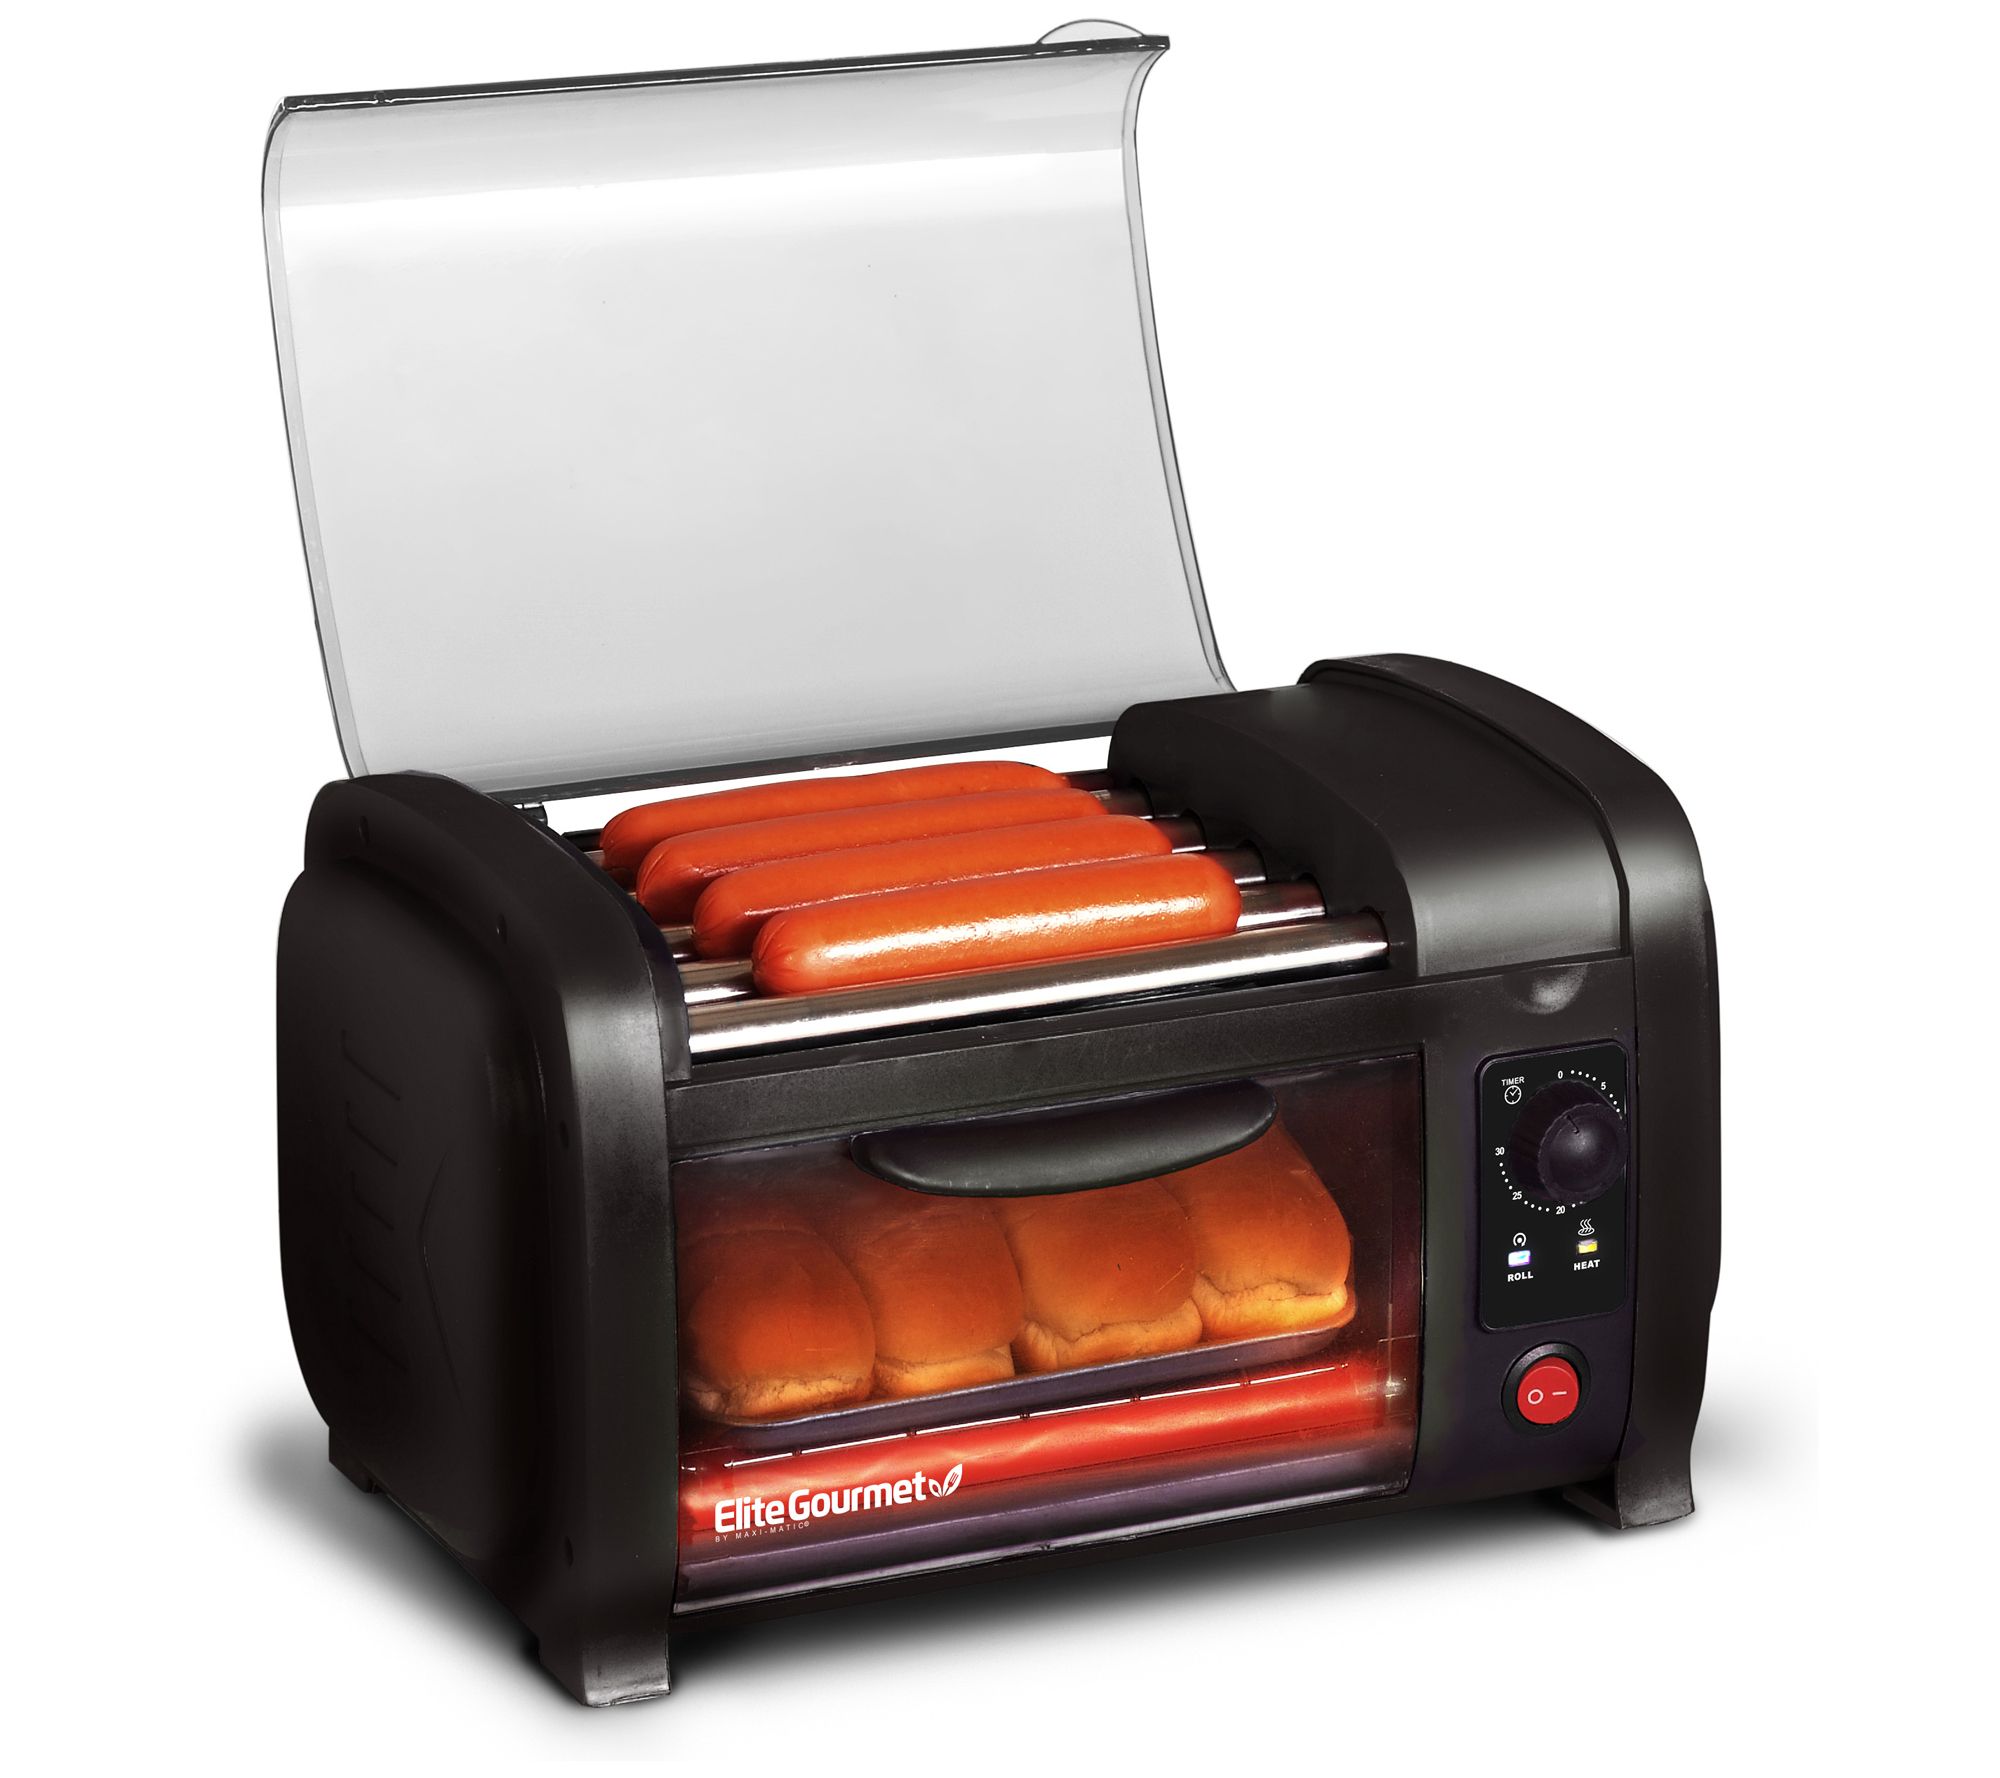 Toaster Oven- Black Stainless Steel, Small Appliances: Maxi-Aids, Inc.